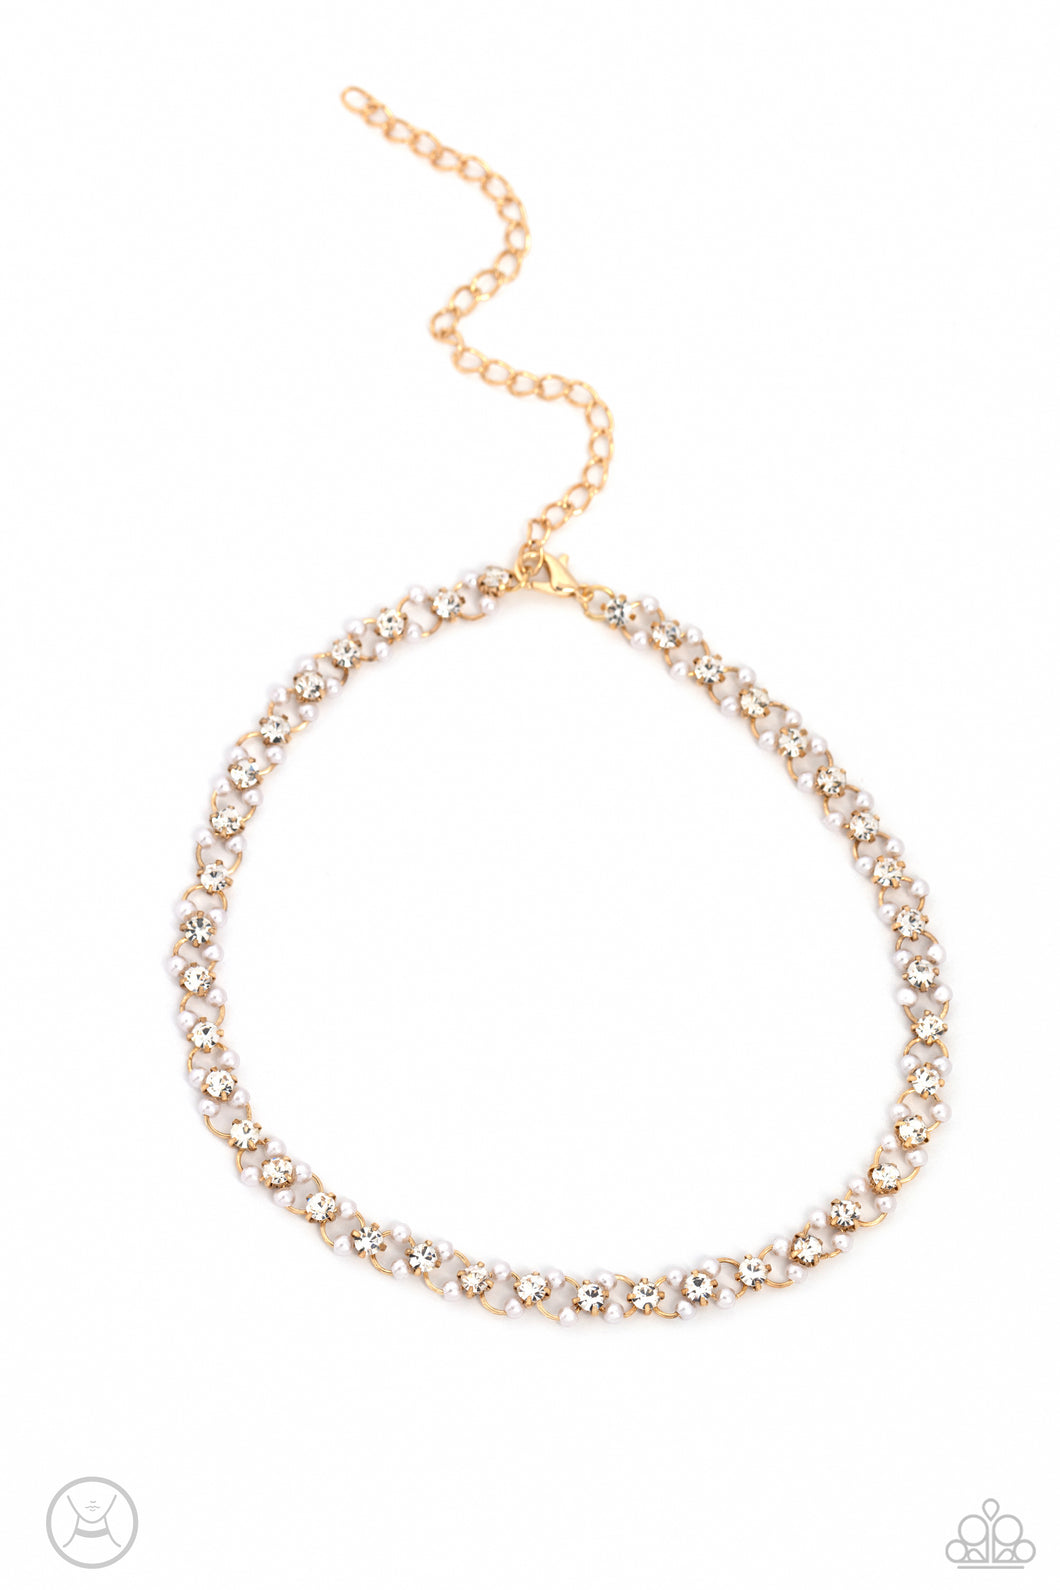 Classy Couture - Gold Choker Necklace